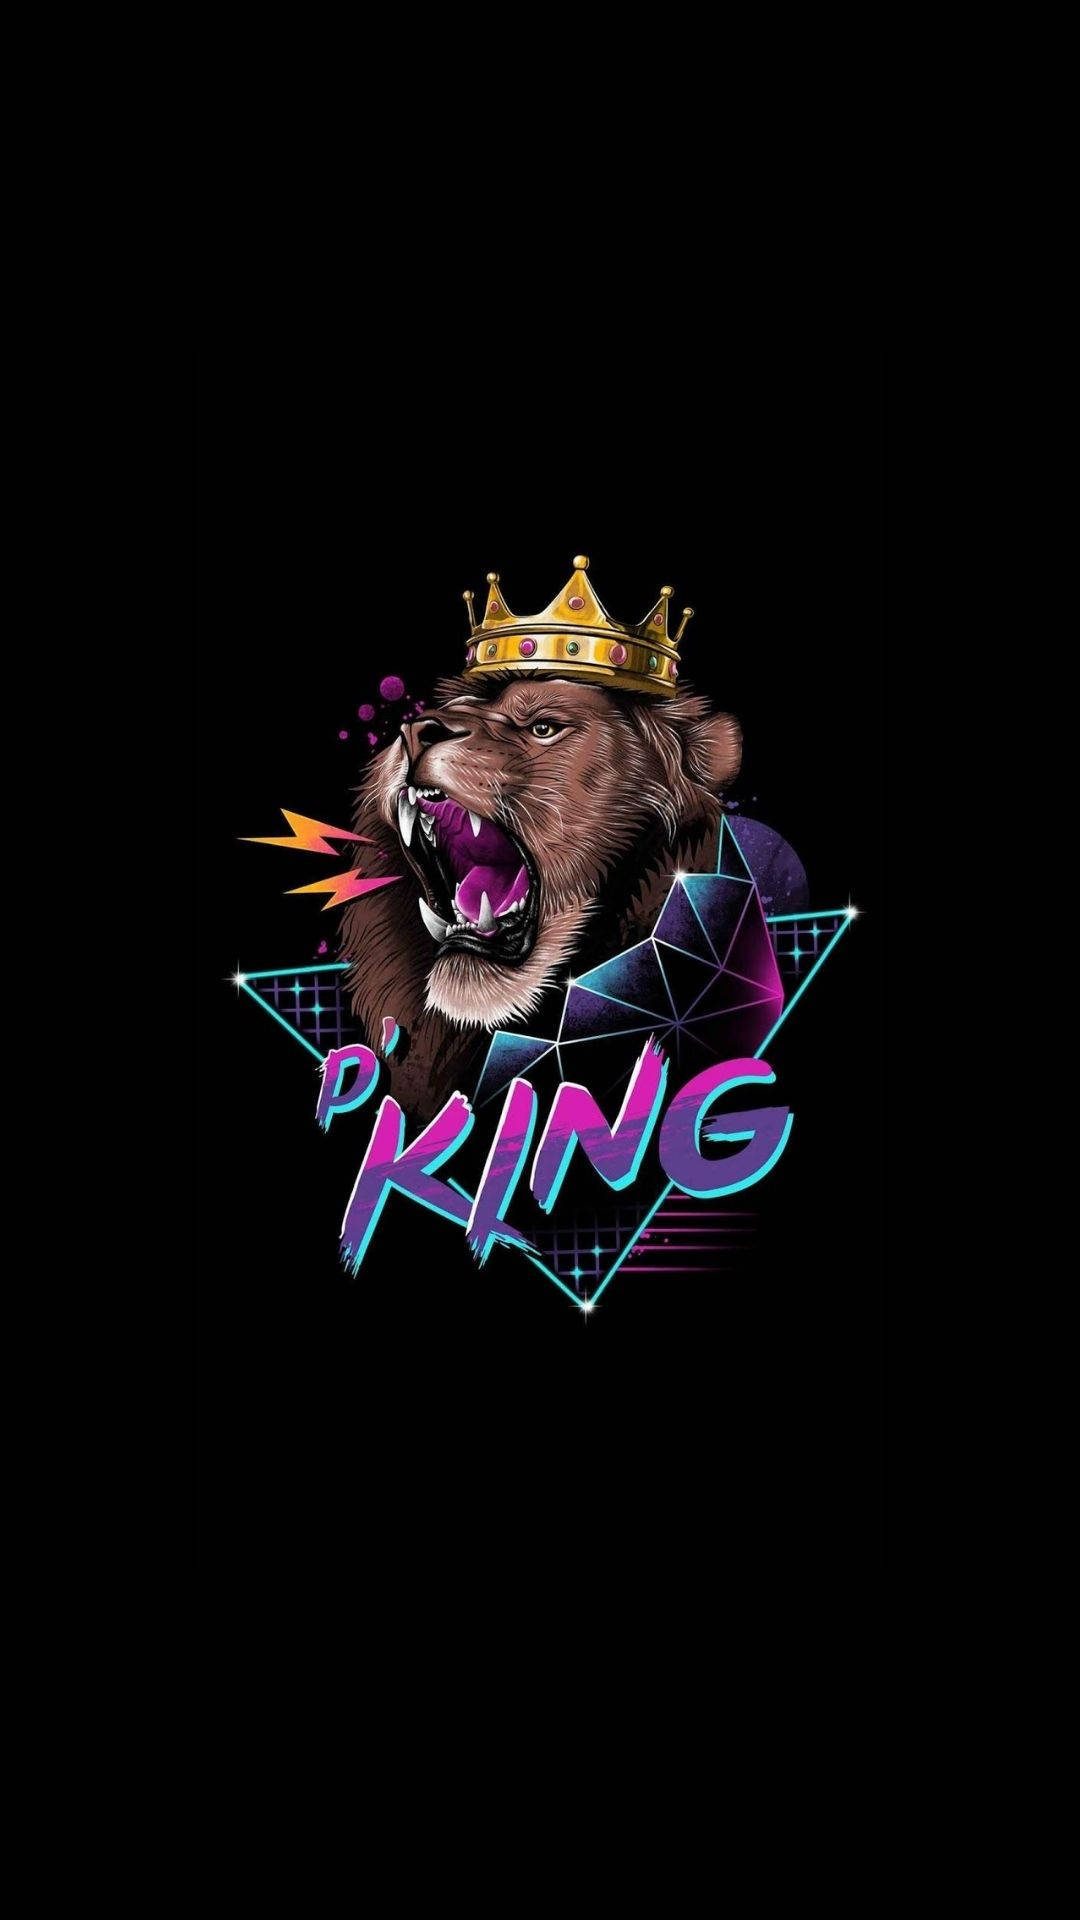 King Pictures Wallpaper